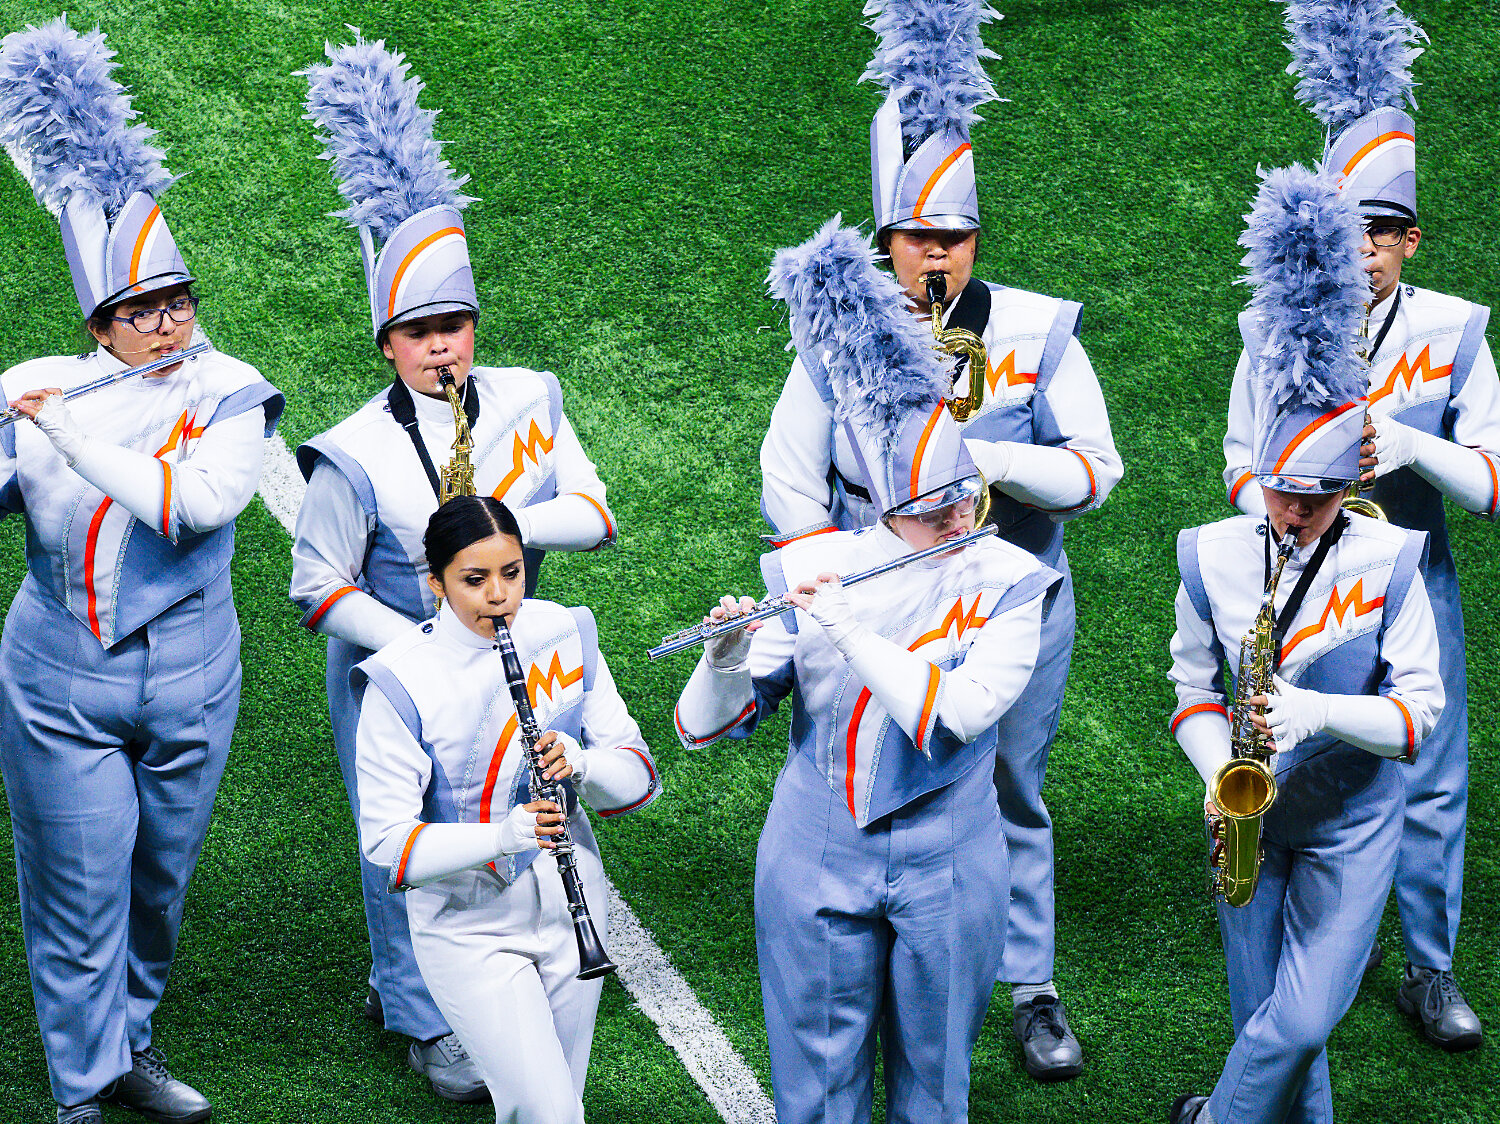 Woodwinds players are featured, including flautist Melissa Torres (far left), who also soloed, and drum major Mariana Delgadillo (hatless, front left) on clarinet. [see several more swarm shots]